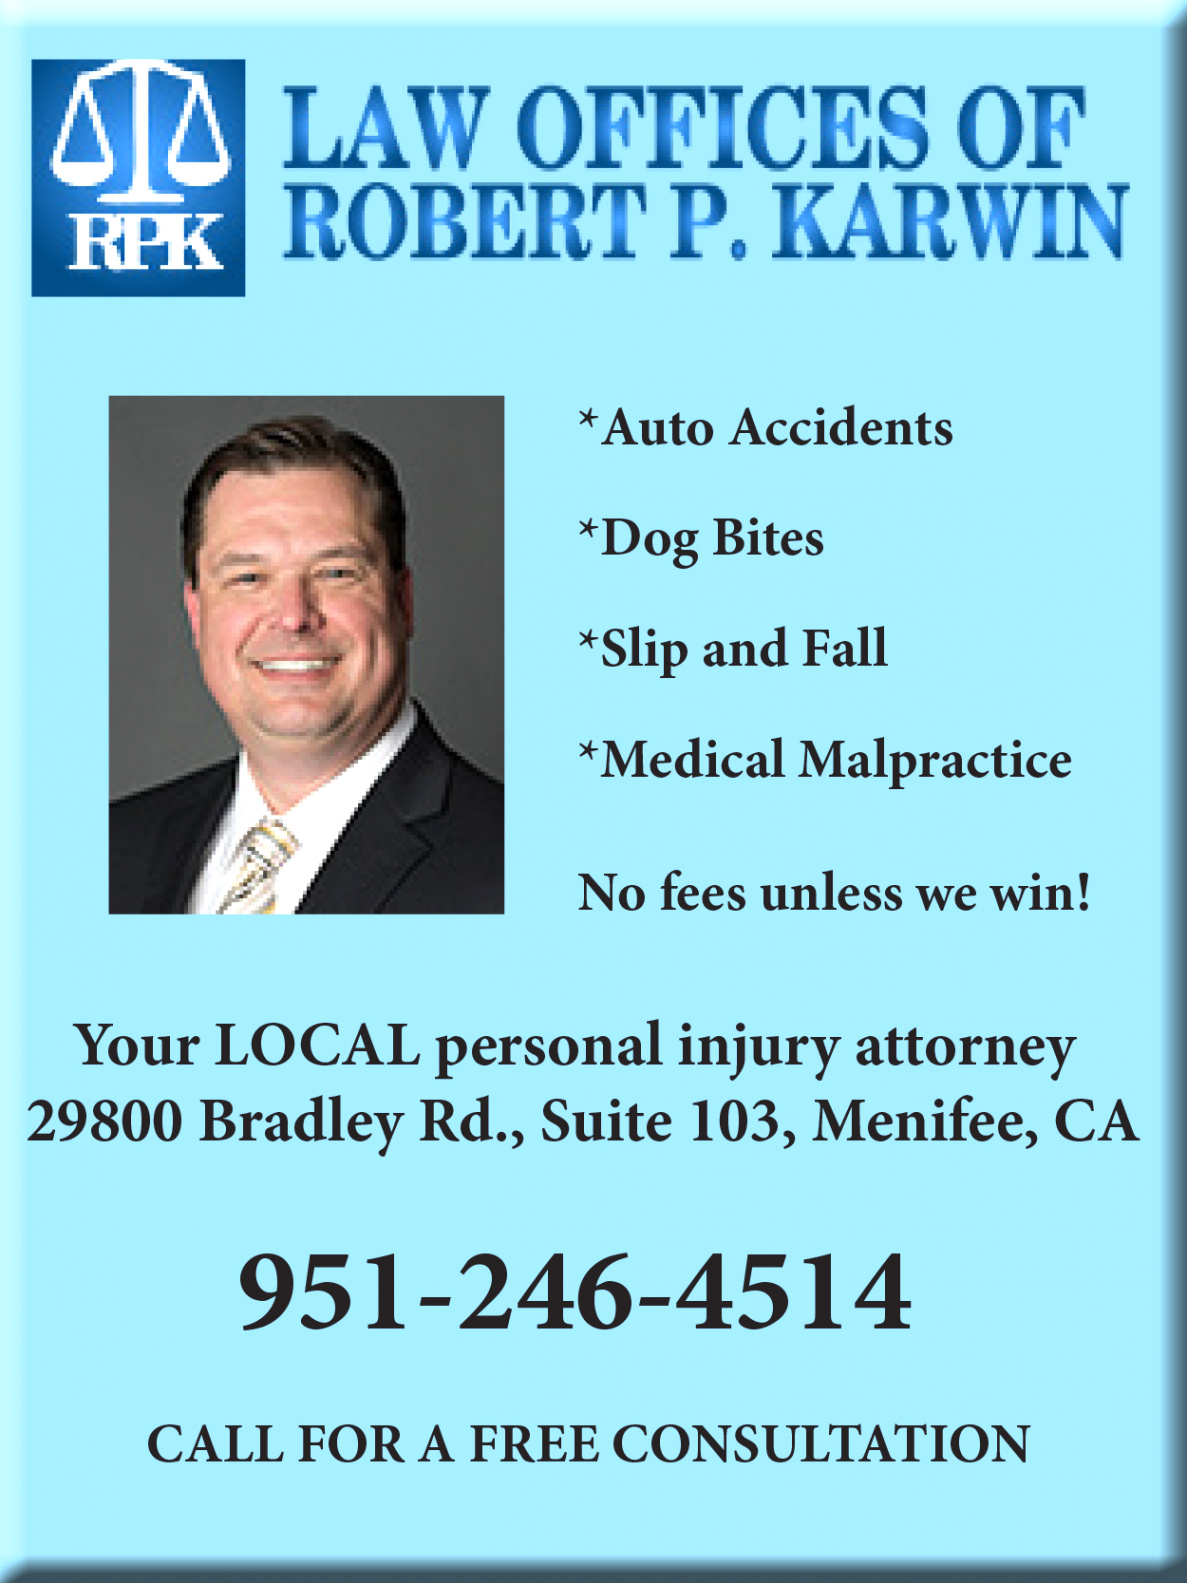 Personil Injury Lawyer In Dolores Co Dans Robert Karwin Specializes In Personal Injury Cases Menifee 24/7